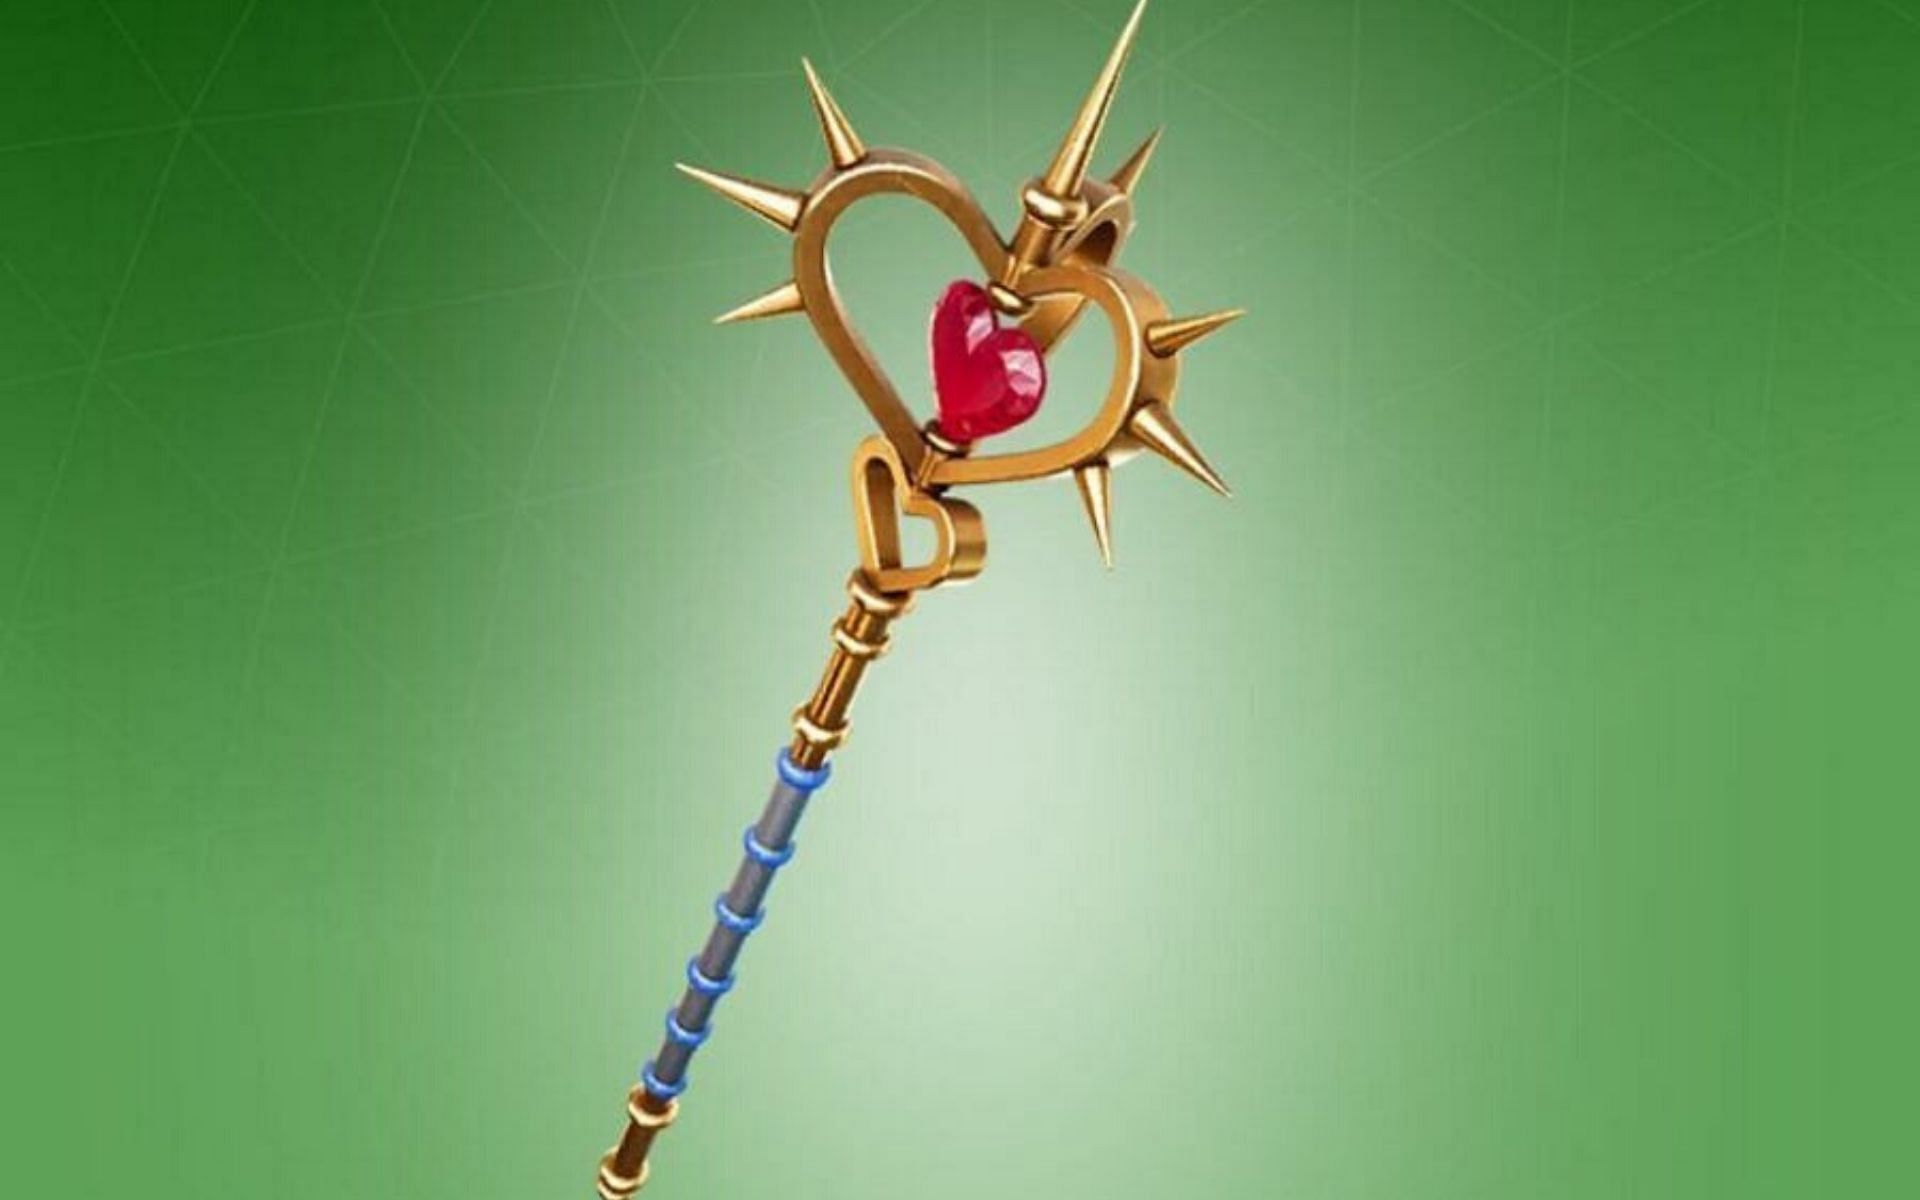 The Mace of Hearts harvesting tool (Image via Epic Games